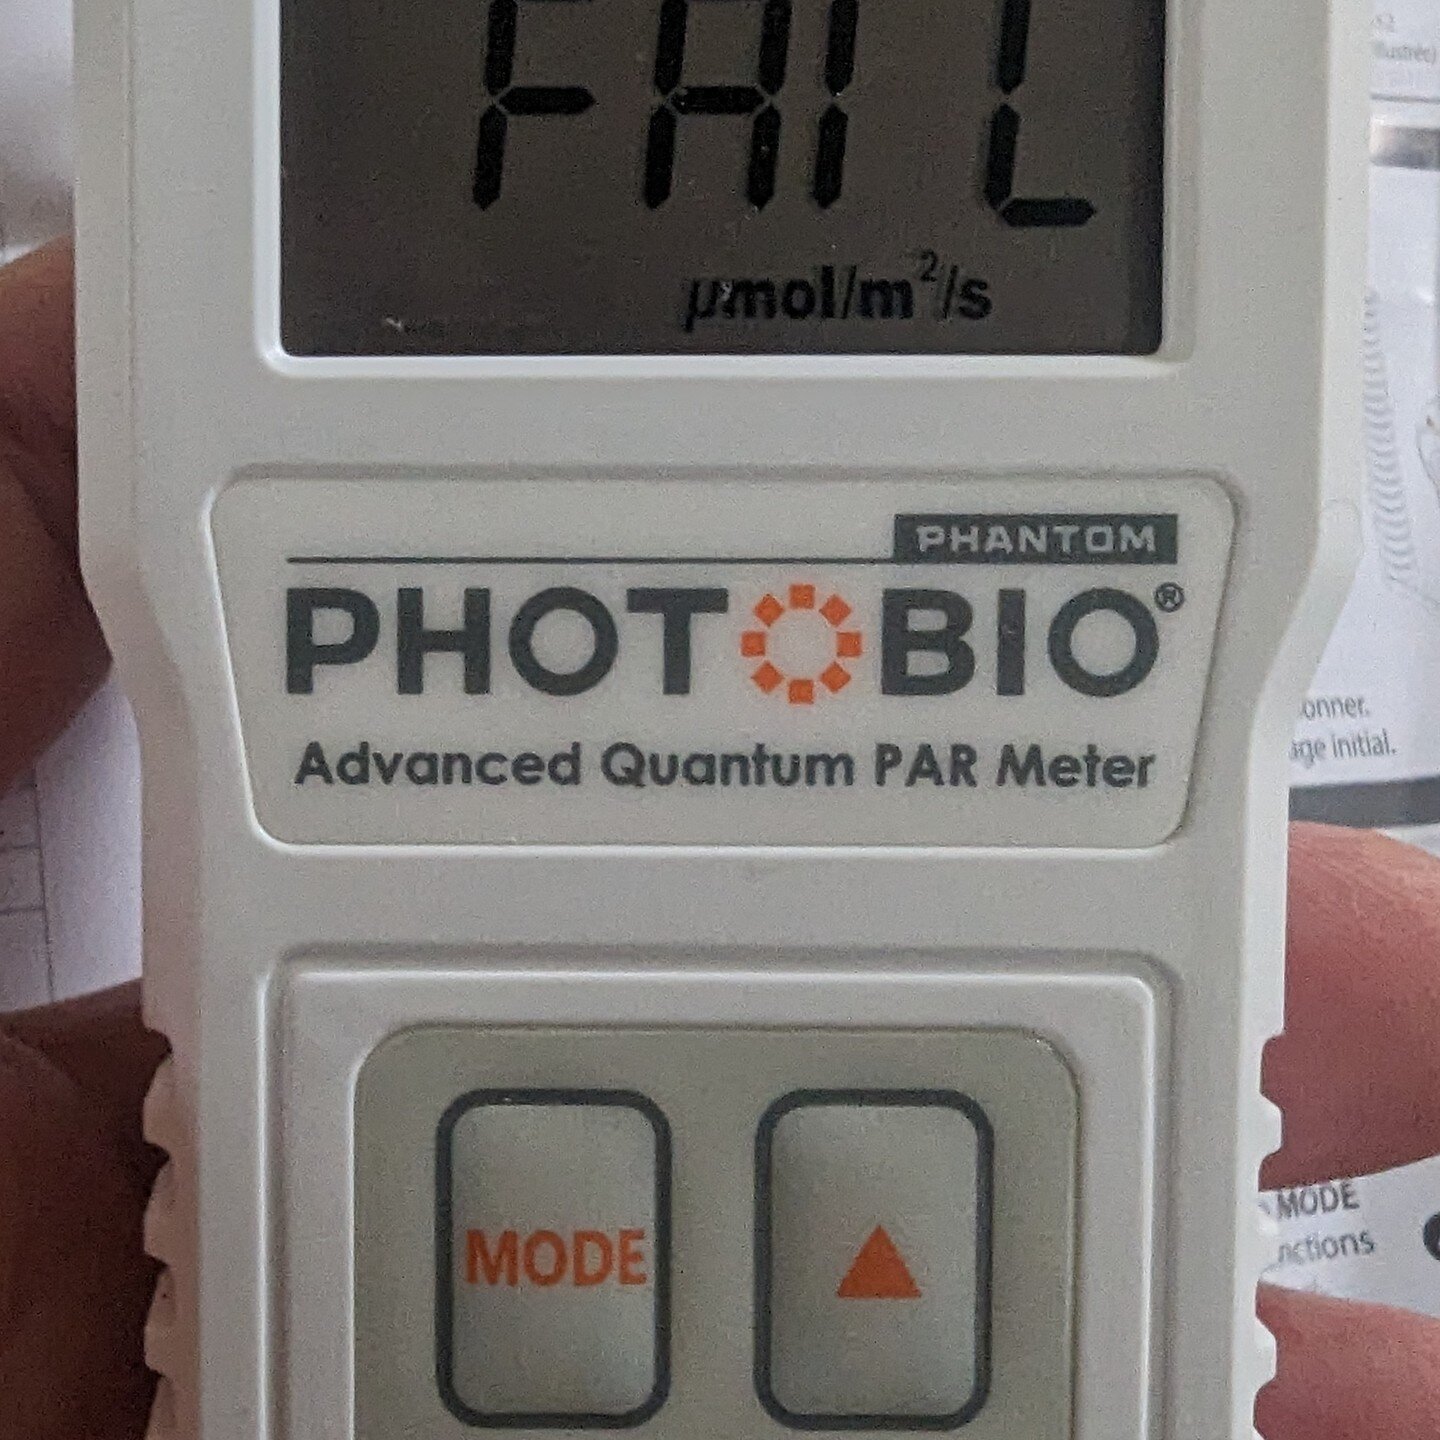 Anyone know how to get ahold of @photobioled? I have a brand new PAR meter that won't reset, recalibrate, or do anything with a battery change. 'zon says to contact the manufacturer and Photobio doesn't respond to website or IG inquiries. Does anyone